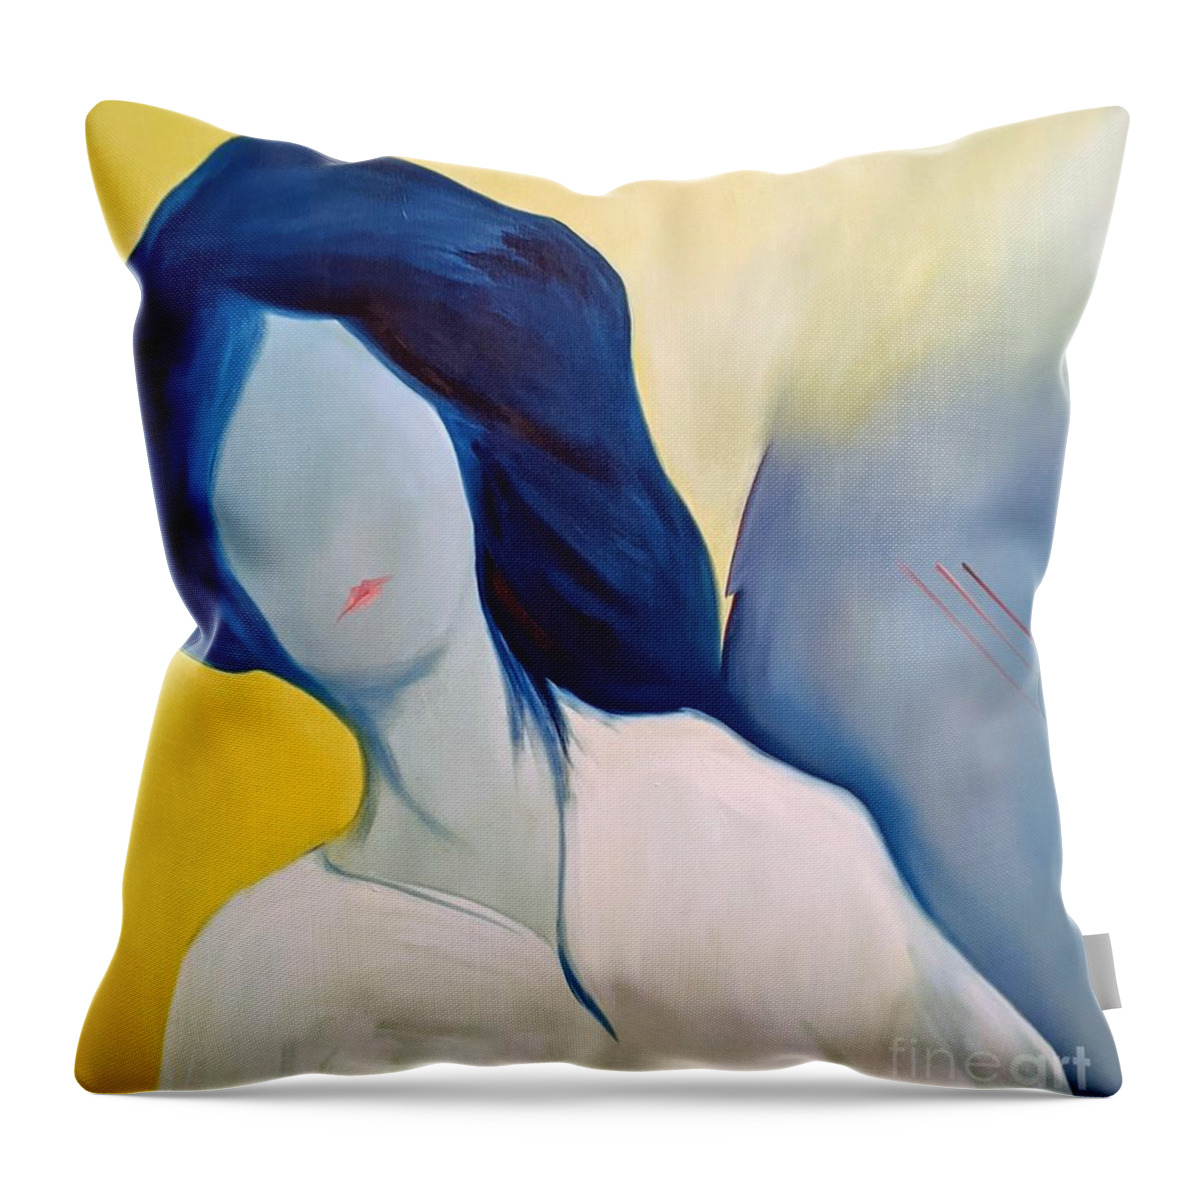 Woman Throw Pillow featuring the painting The Ties of the World by Jodie Marie Anne Richardson Traugott     aka jm-ART